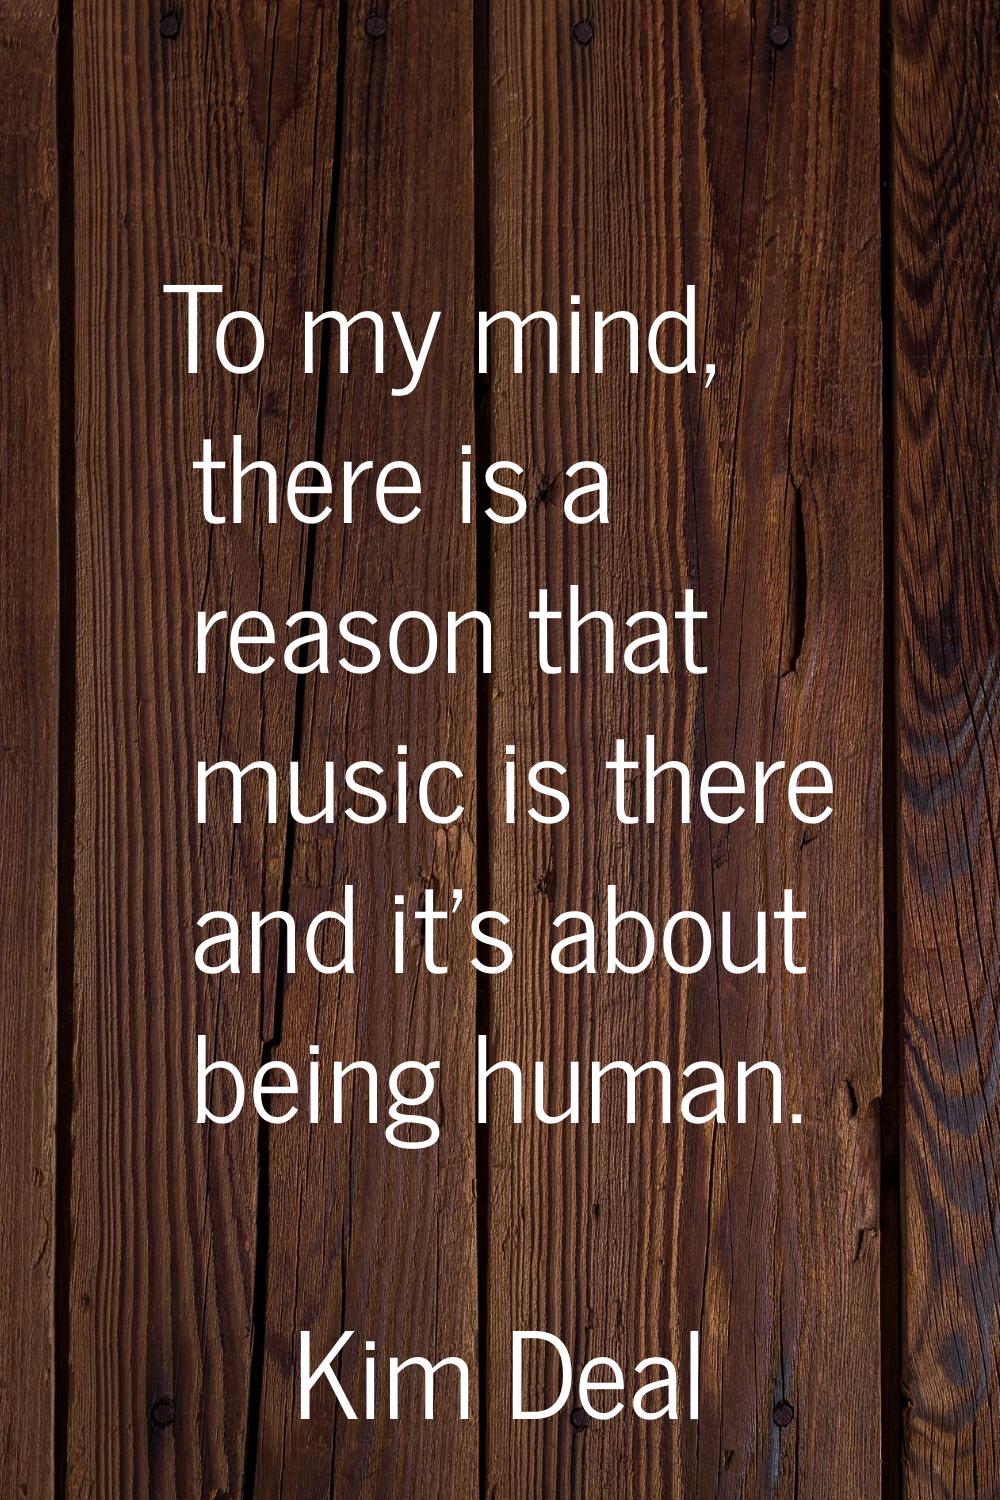 To my mind, there is a reason that music is there and it's about being human.